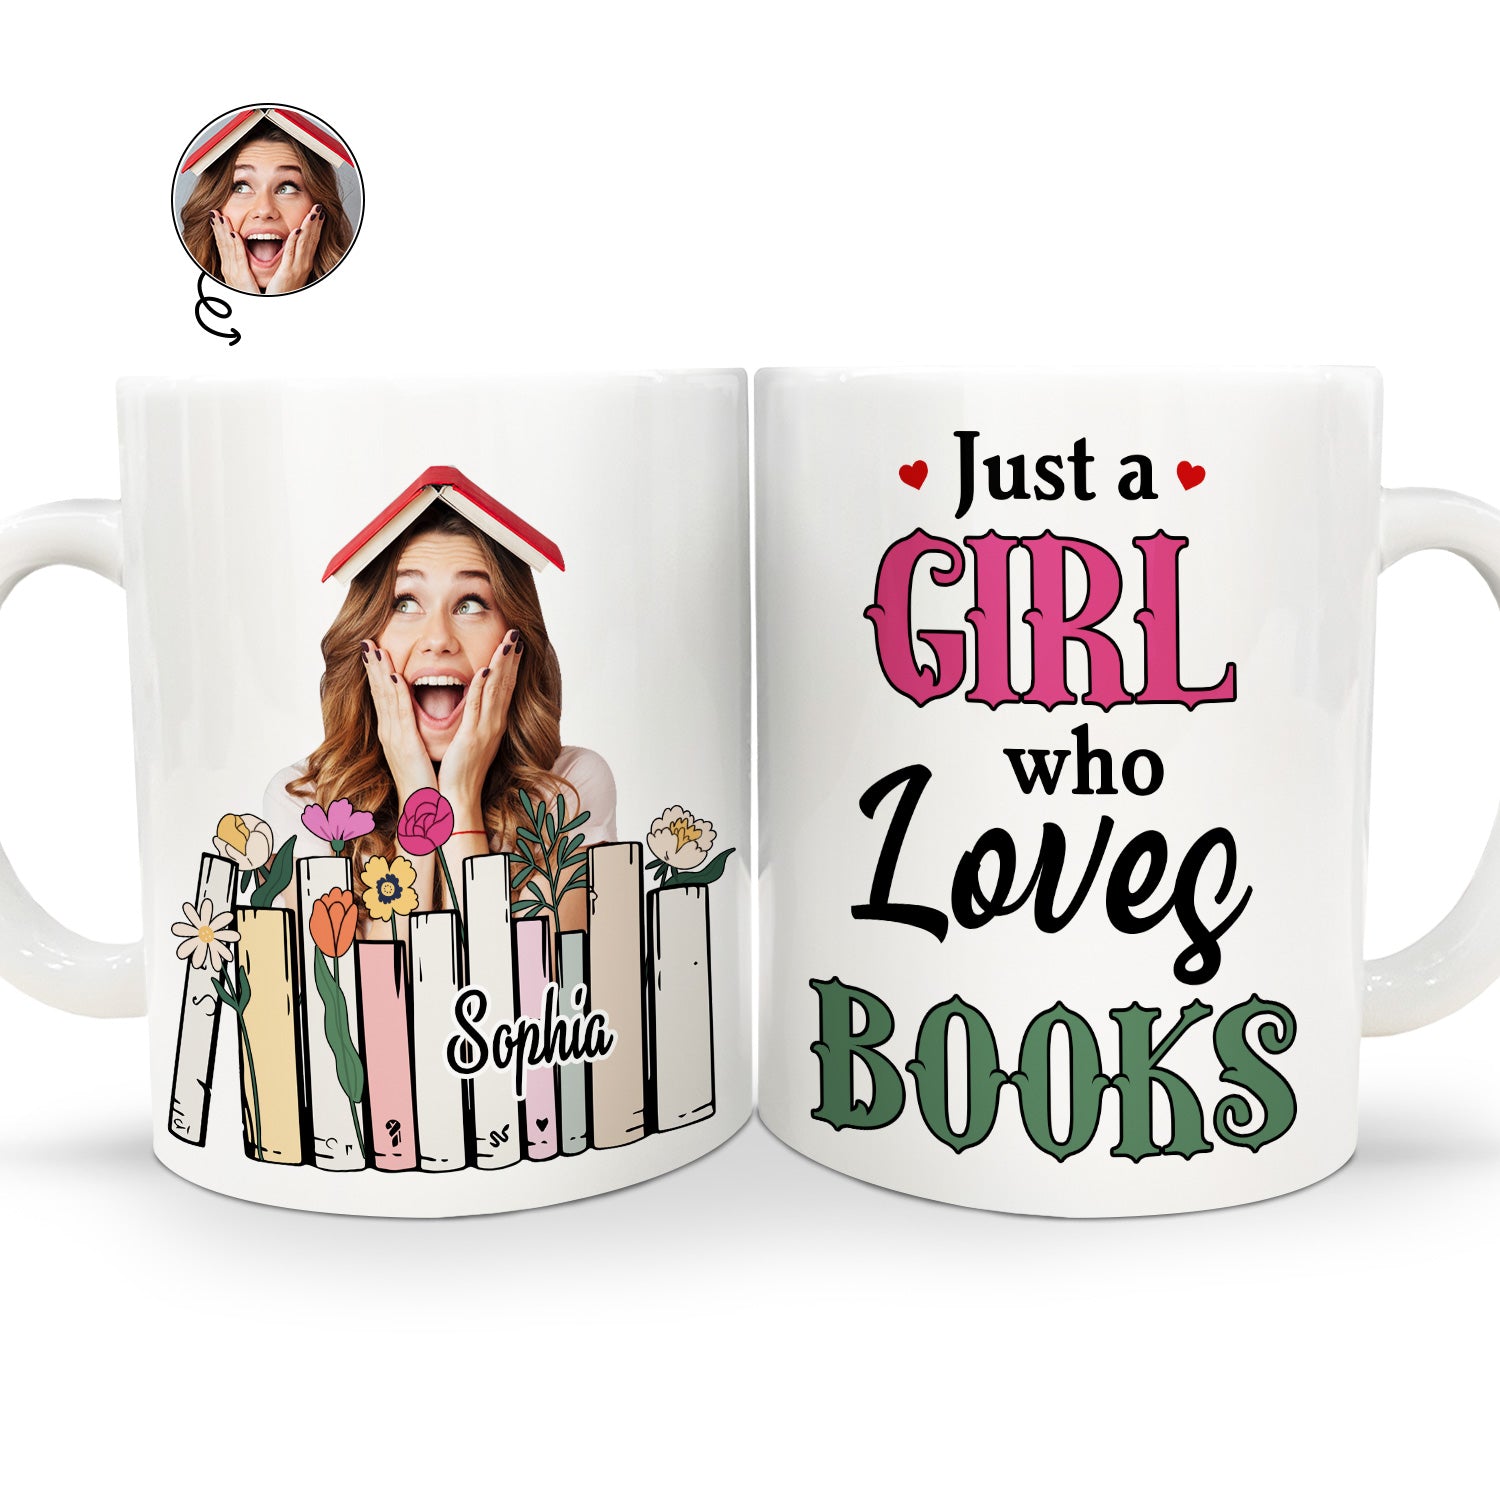 Custom Photo A Girl Loves Books - Gift For Book Lovers, Reading Lovers, Women, Yourself - Personalized White Edge-to-Edge Mug